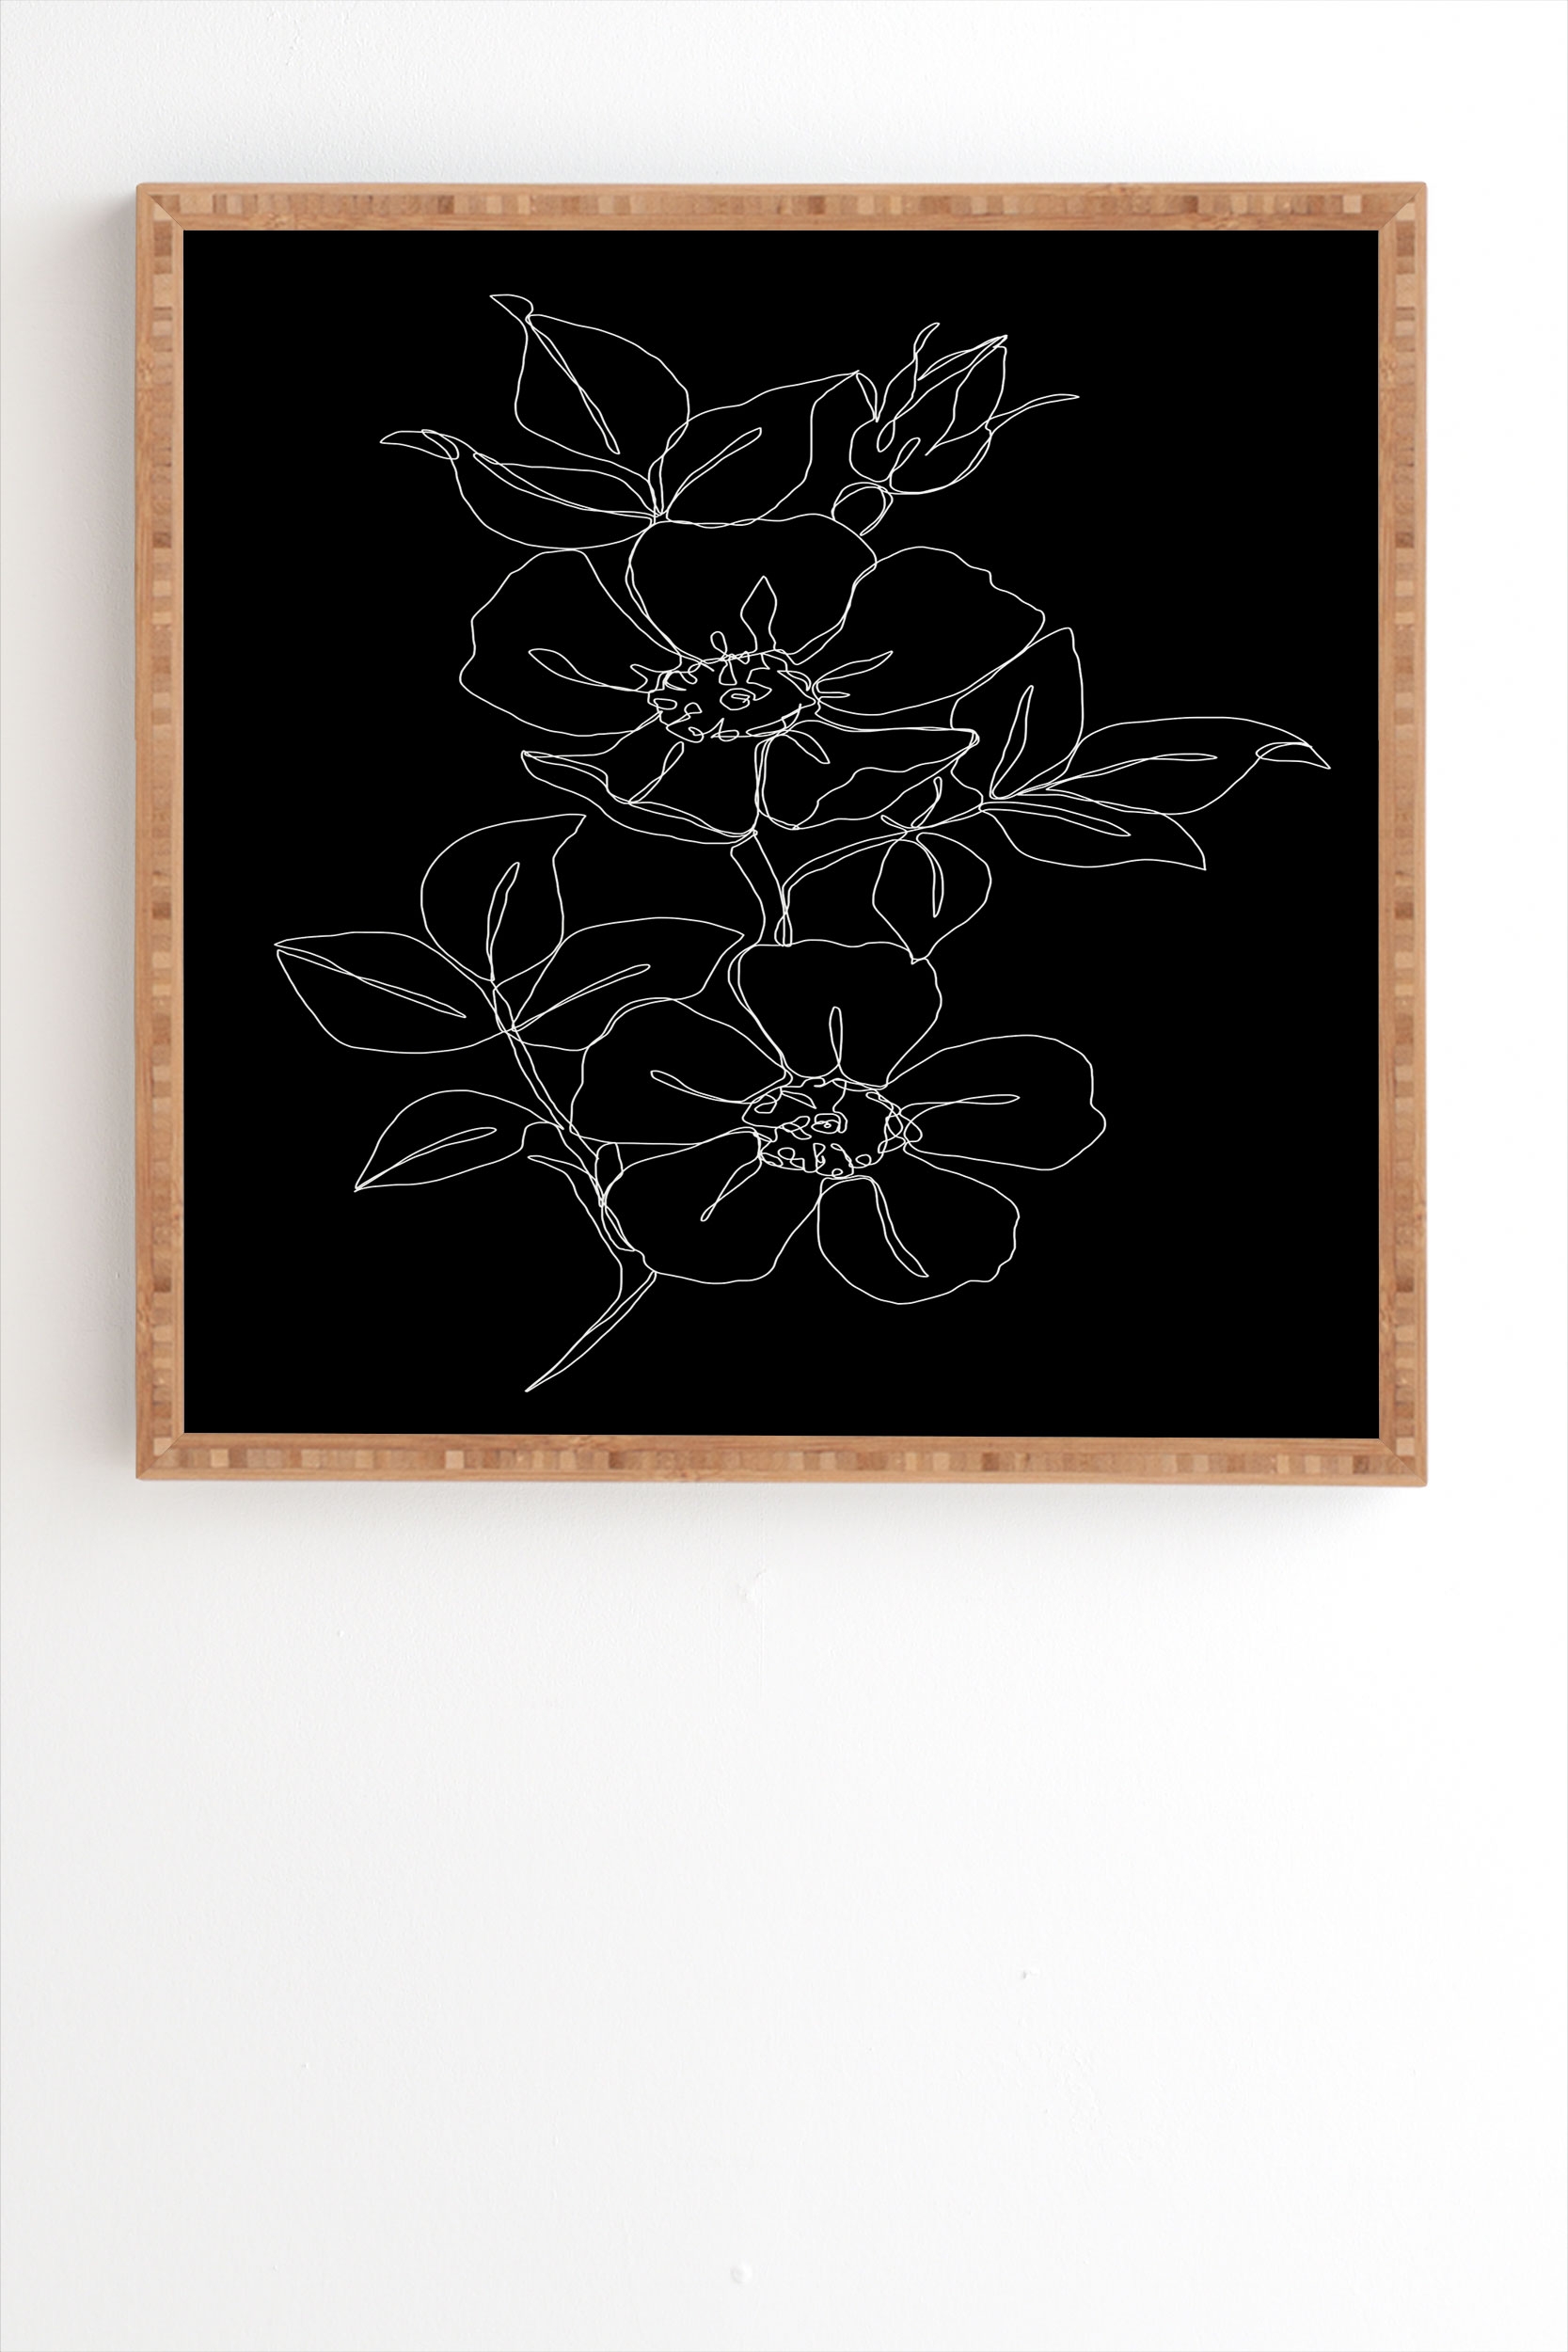 Botanical Illustration by The Colour Study - Framed Wall Art Bamboo 19" x 22.4" - Image 1